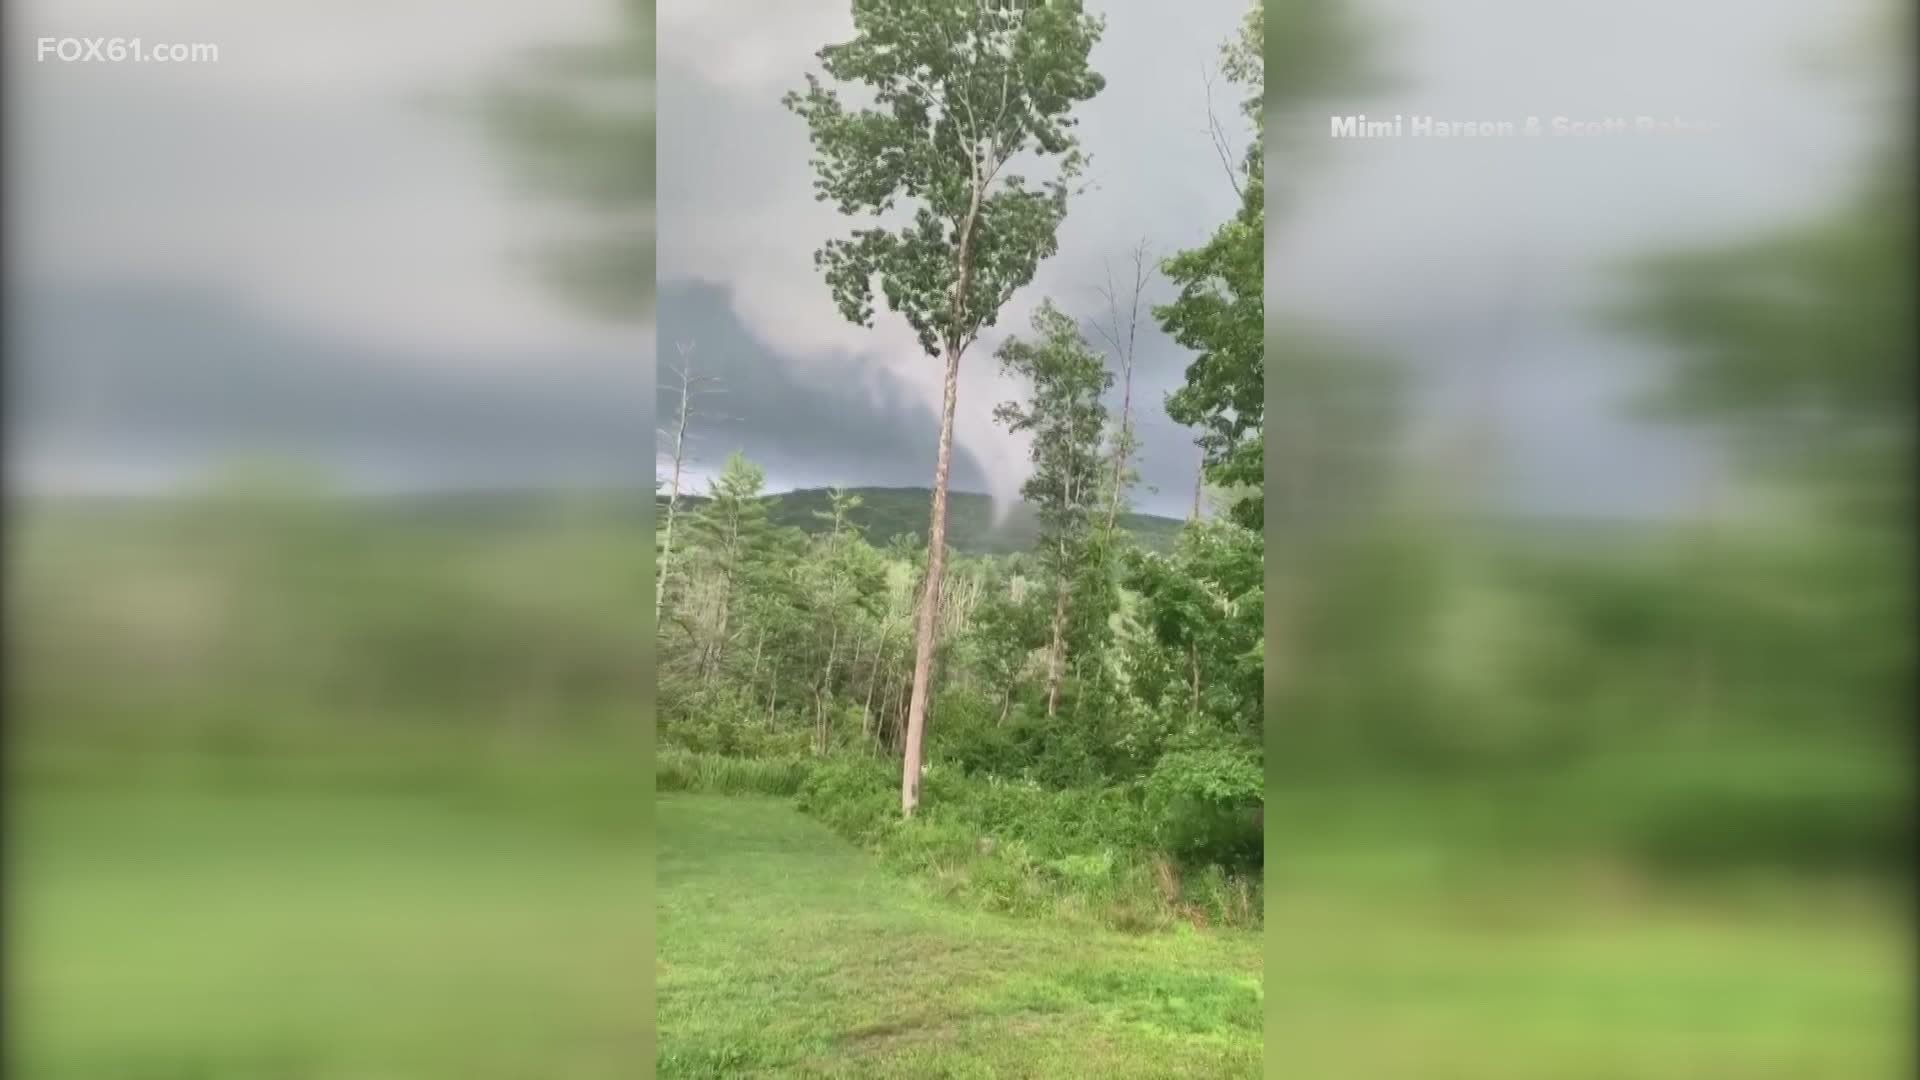 The tornado came as a severe storm crossed several towns Sunday afternoon